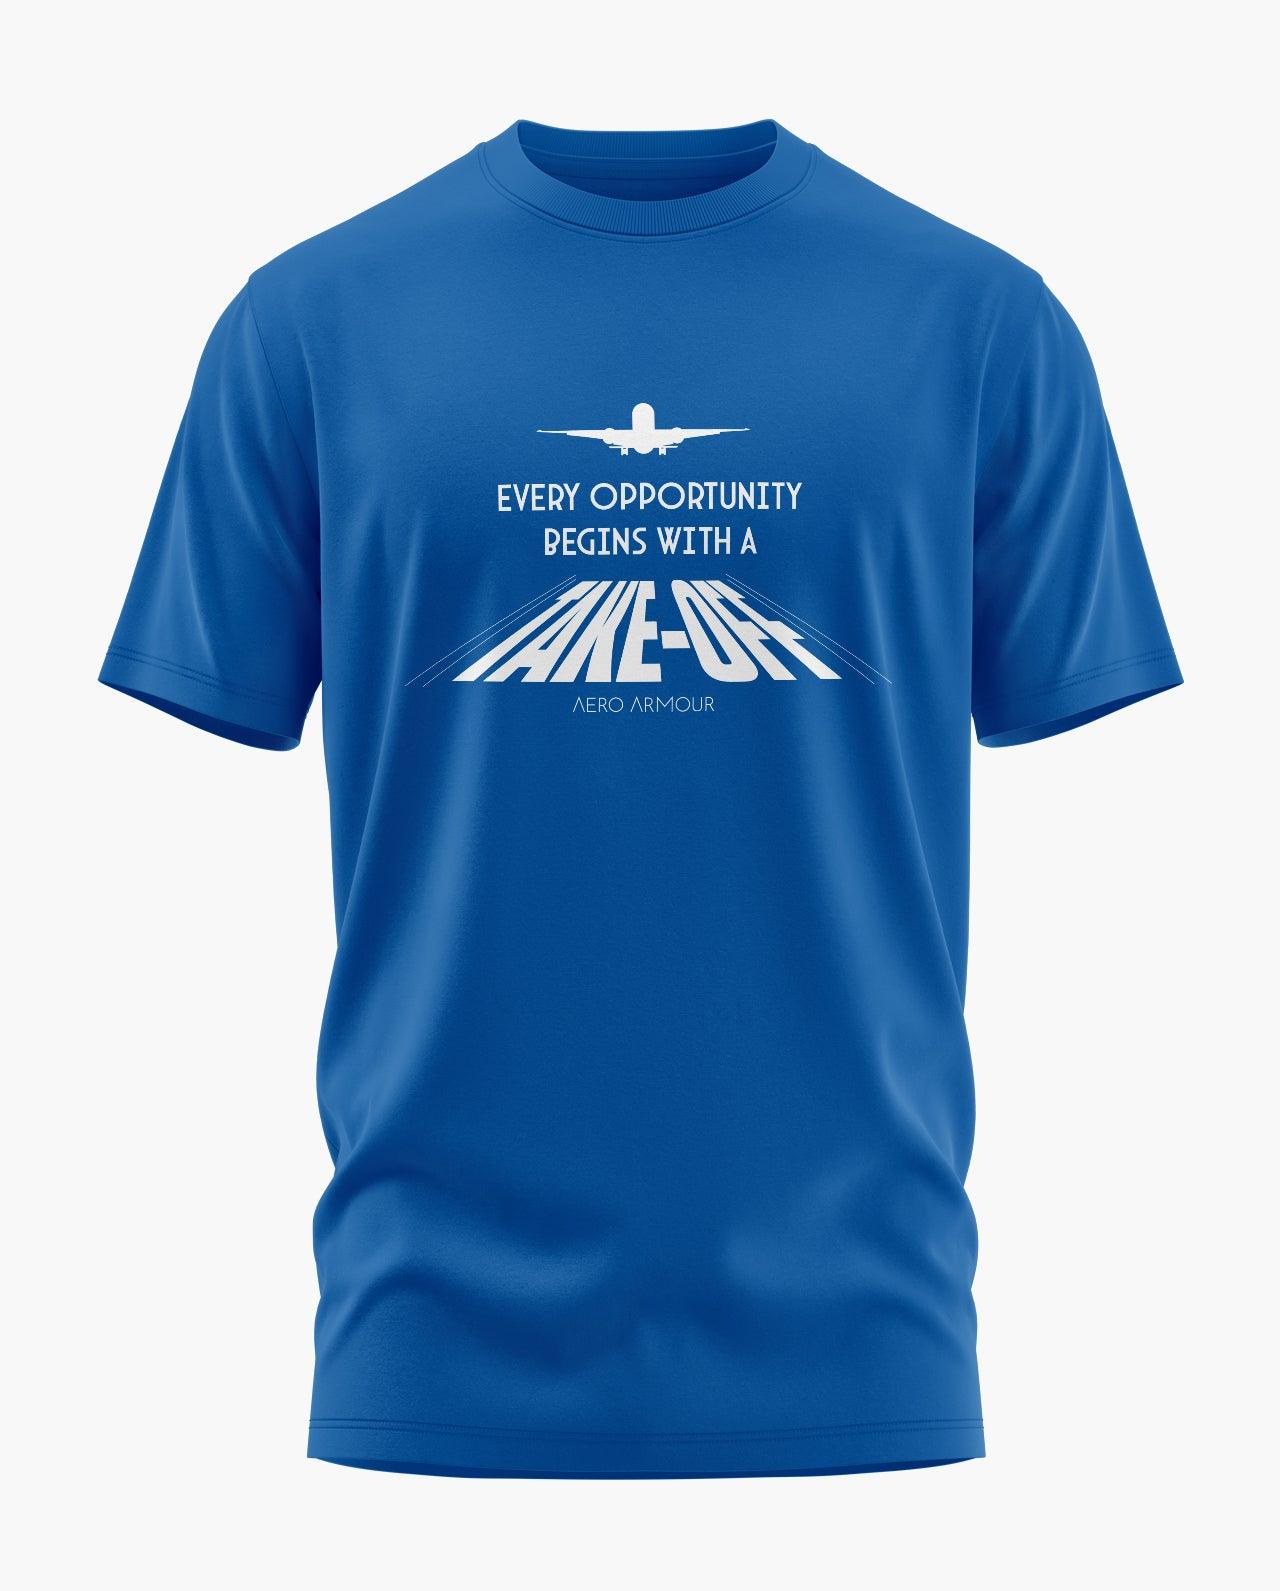 Every Opportunity Begins With A Takeoff T-Shirt - Aero Armour